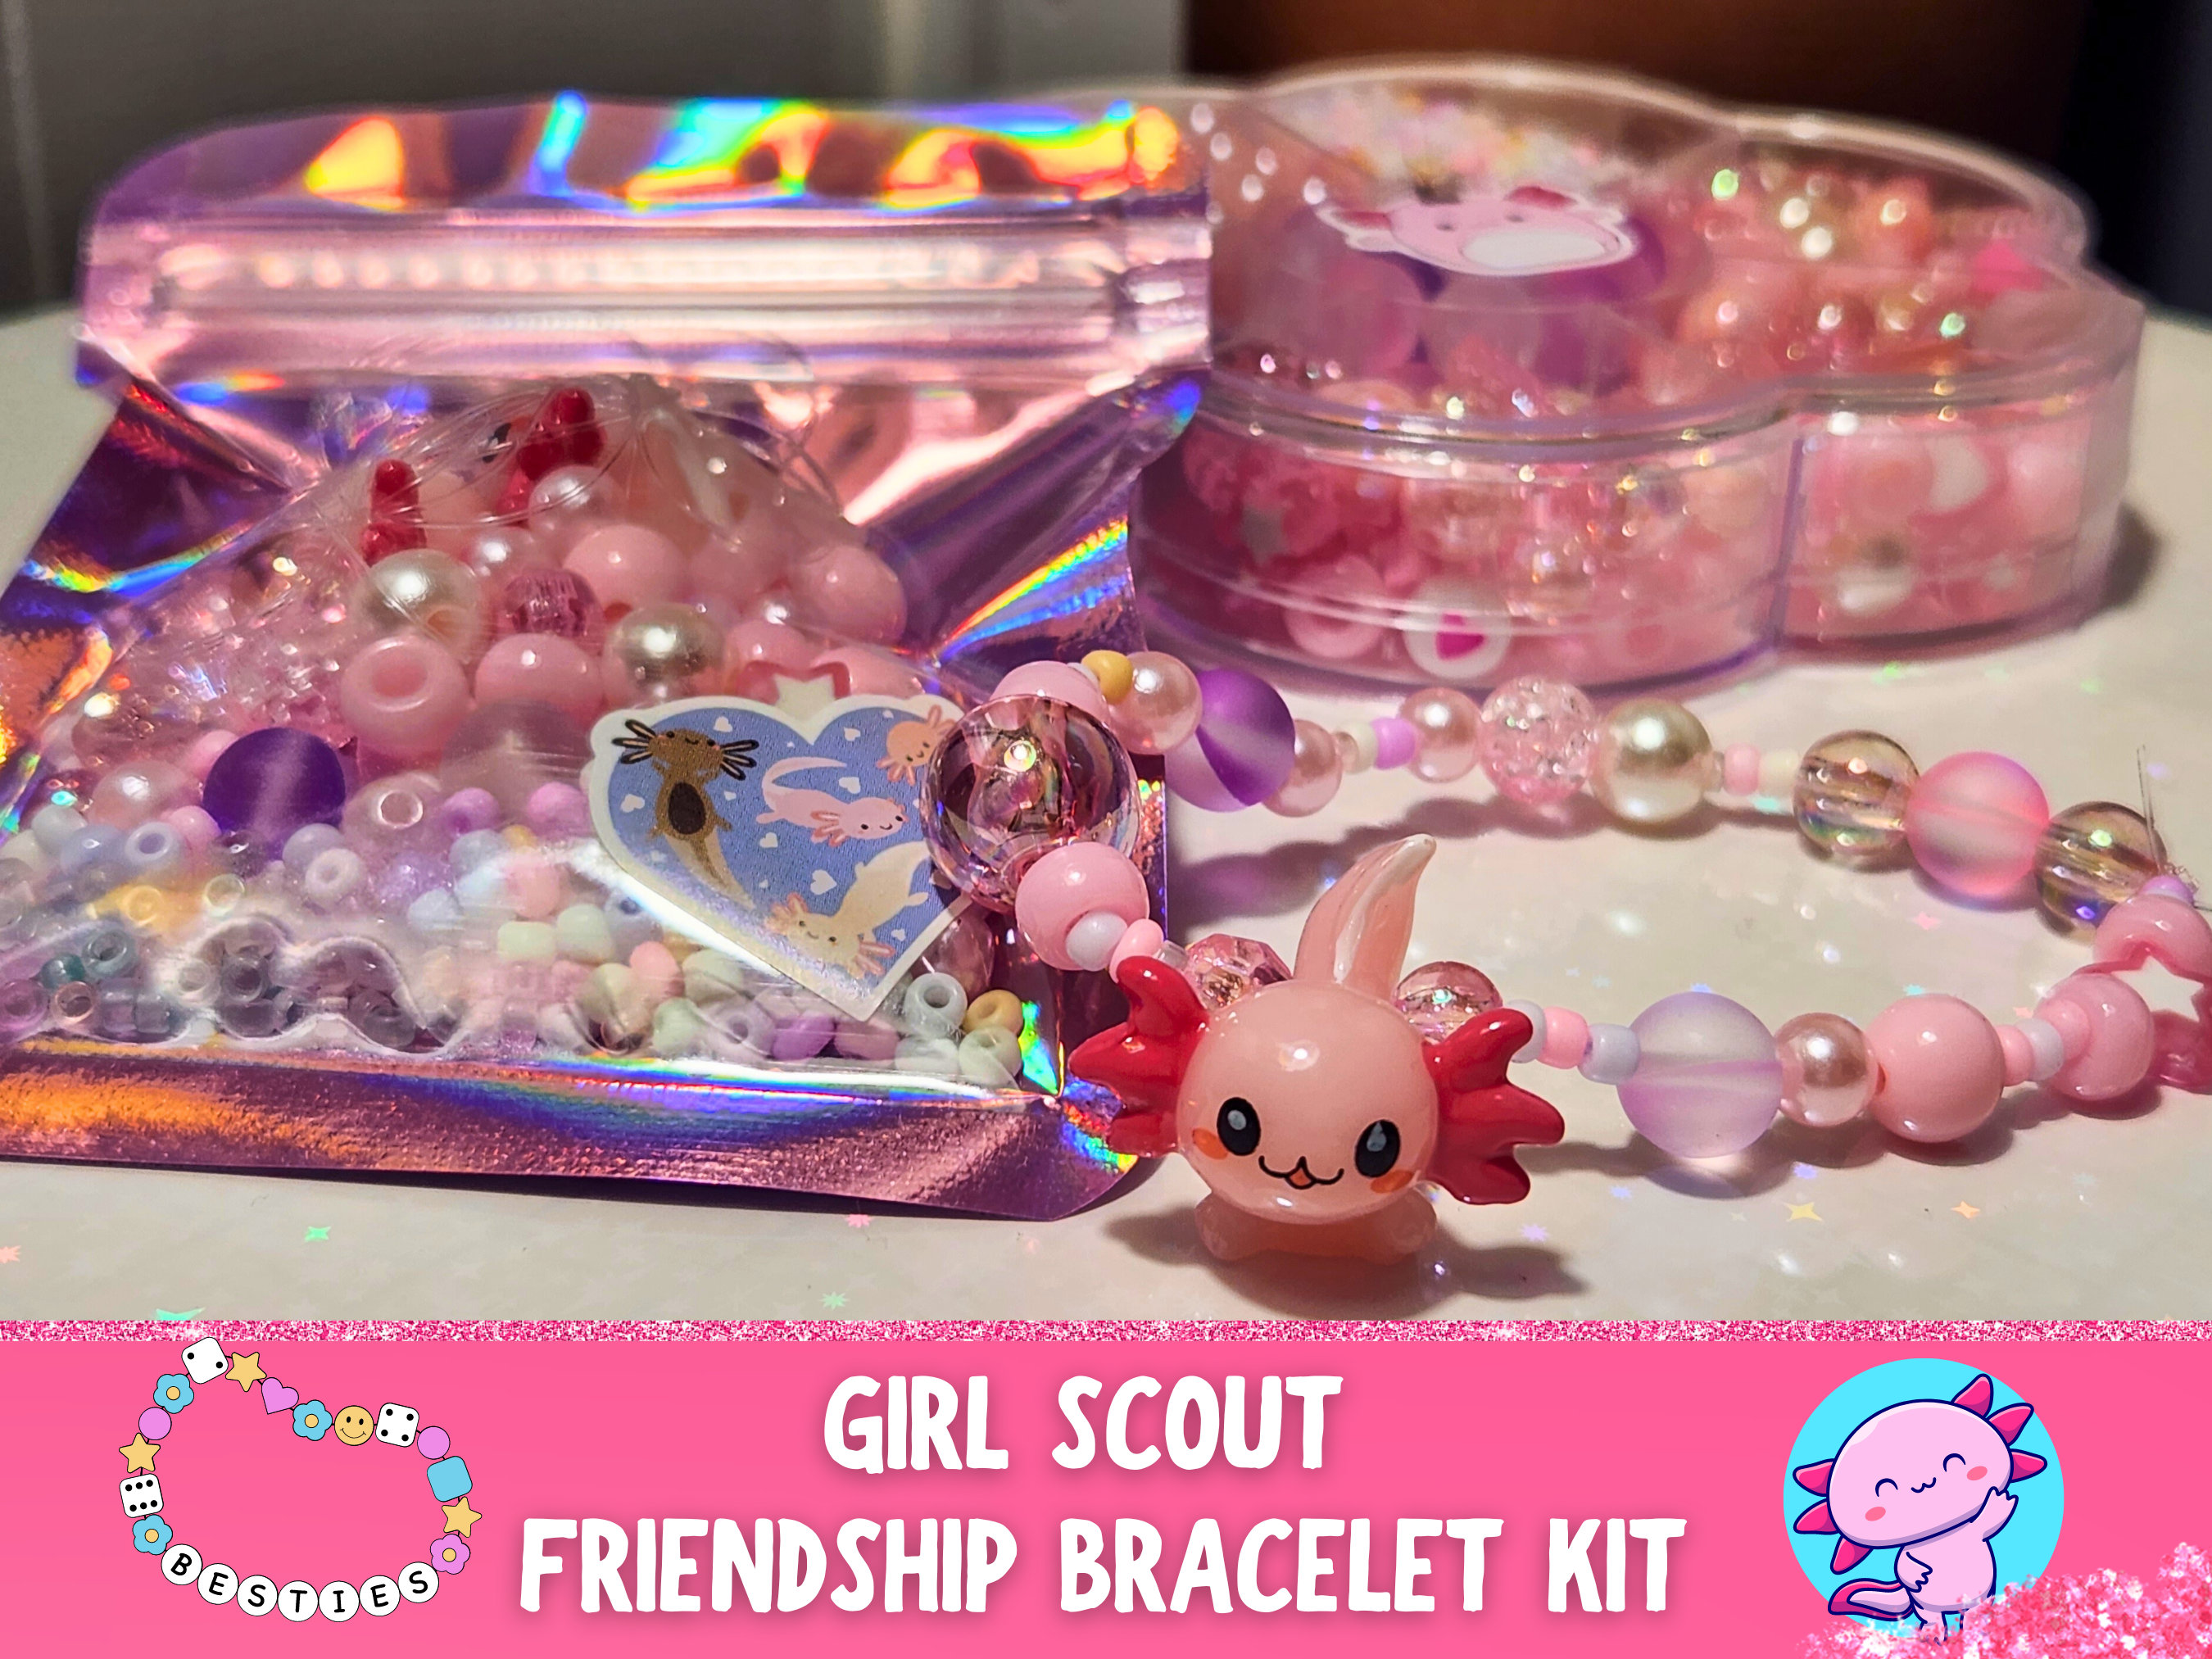 Unique Craft Kits for Girls - Search Shopping